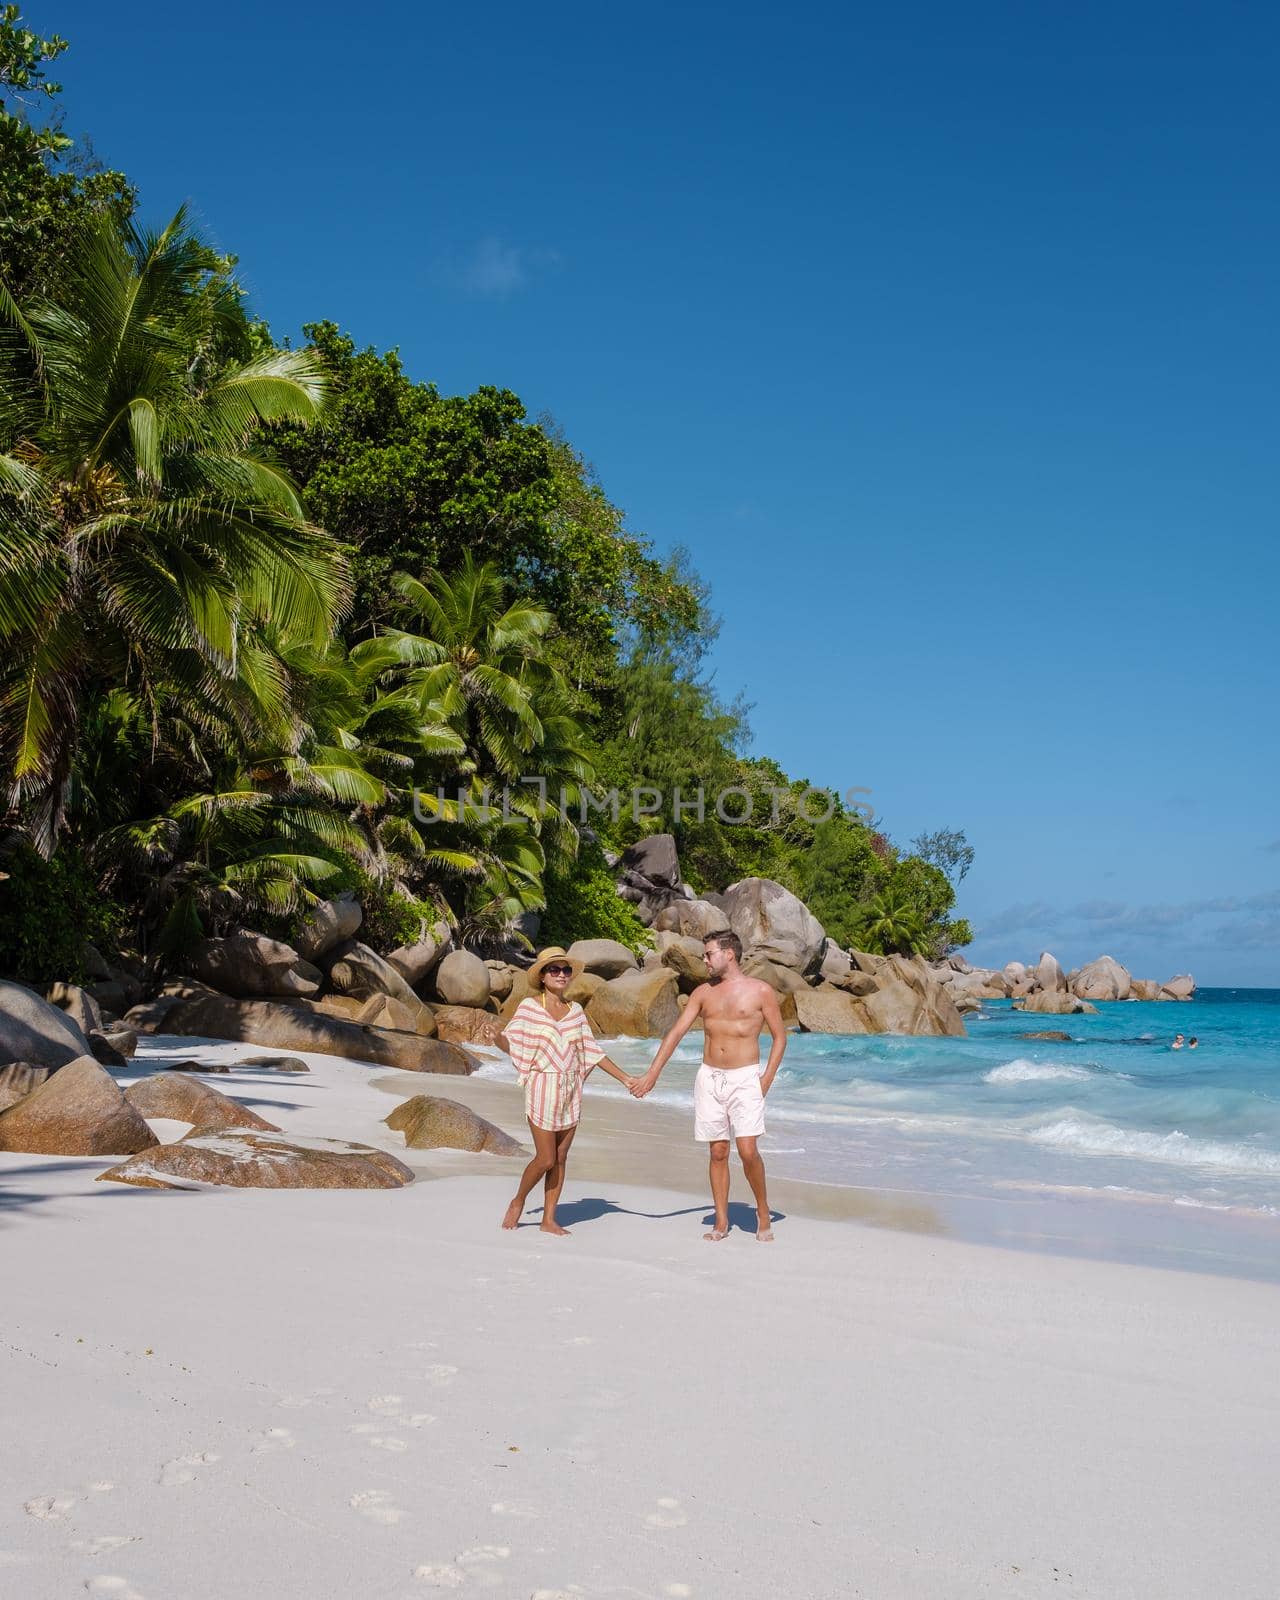 Anse Georgette Praslin Seychelles, young couple of men and woman on a tropical beach during a luxury vacation in Seychelles. Tropical beach Anse Georgette Praslin Seychelles.